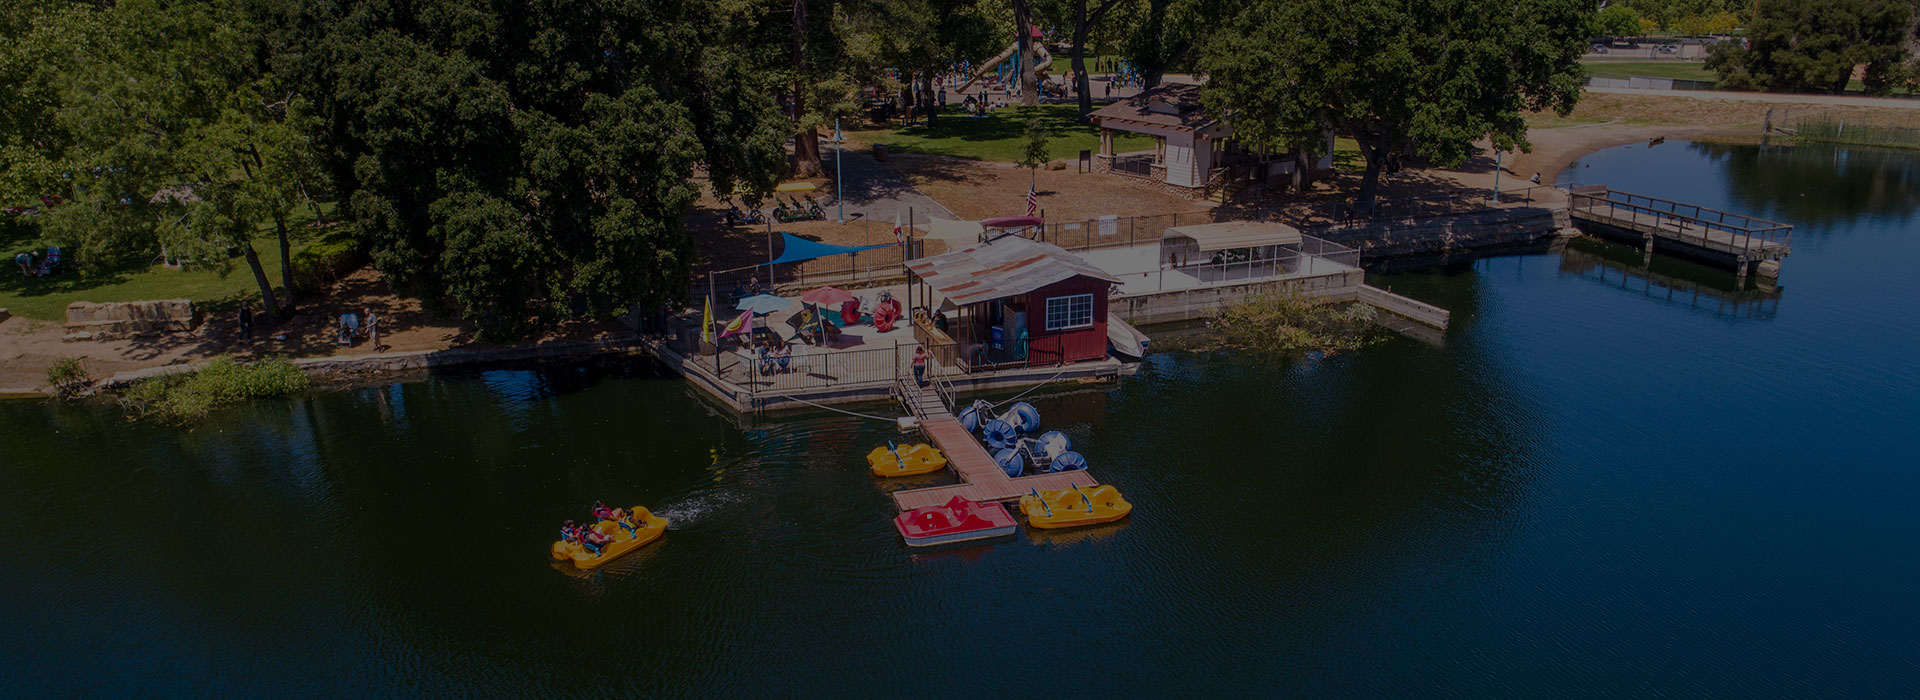 Surrey Bike Rentals - Central Coast Activities - Paddle Boats - Atascadero Paddle Boats - Mr Putters Boathouse